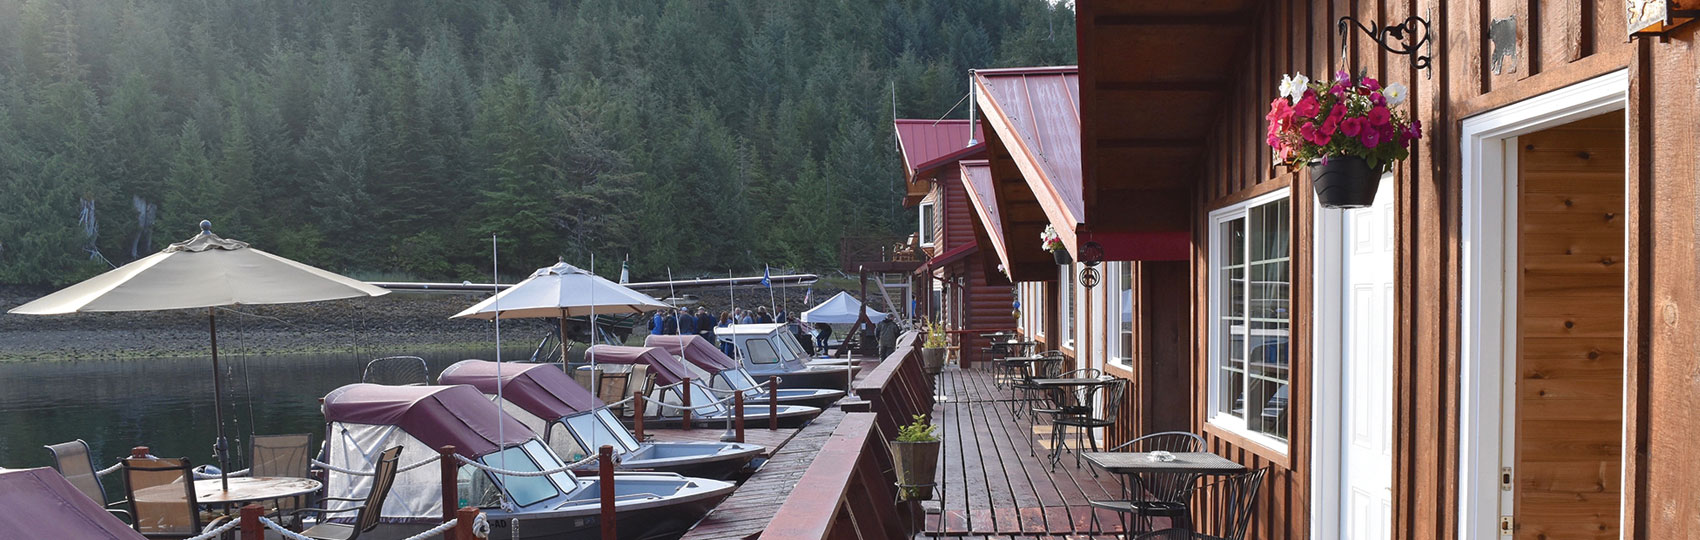 A view of the dock at the lodge.